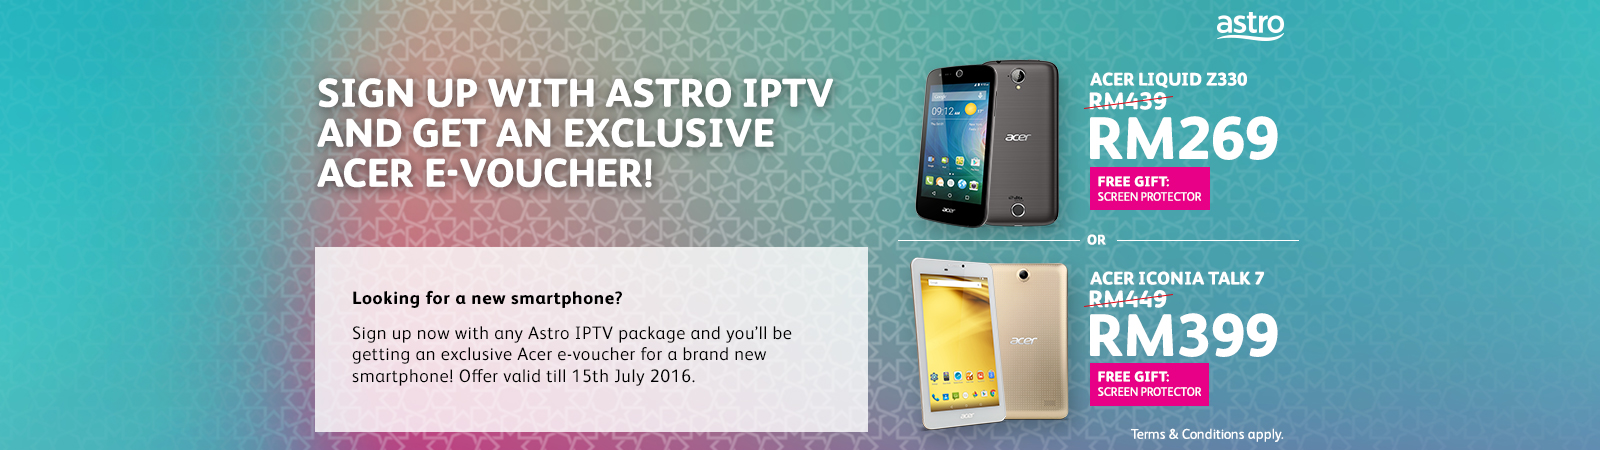 Get exclusive deals on Acer products when subscribing to Astro IPTV! 30